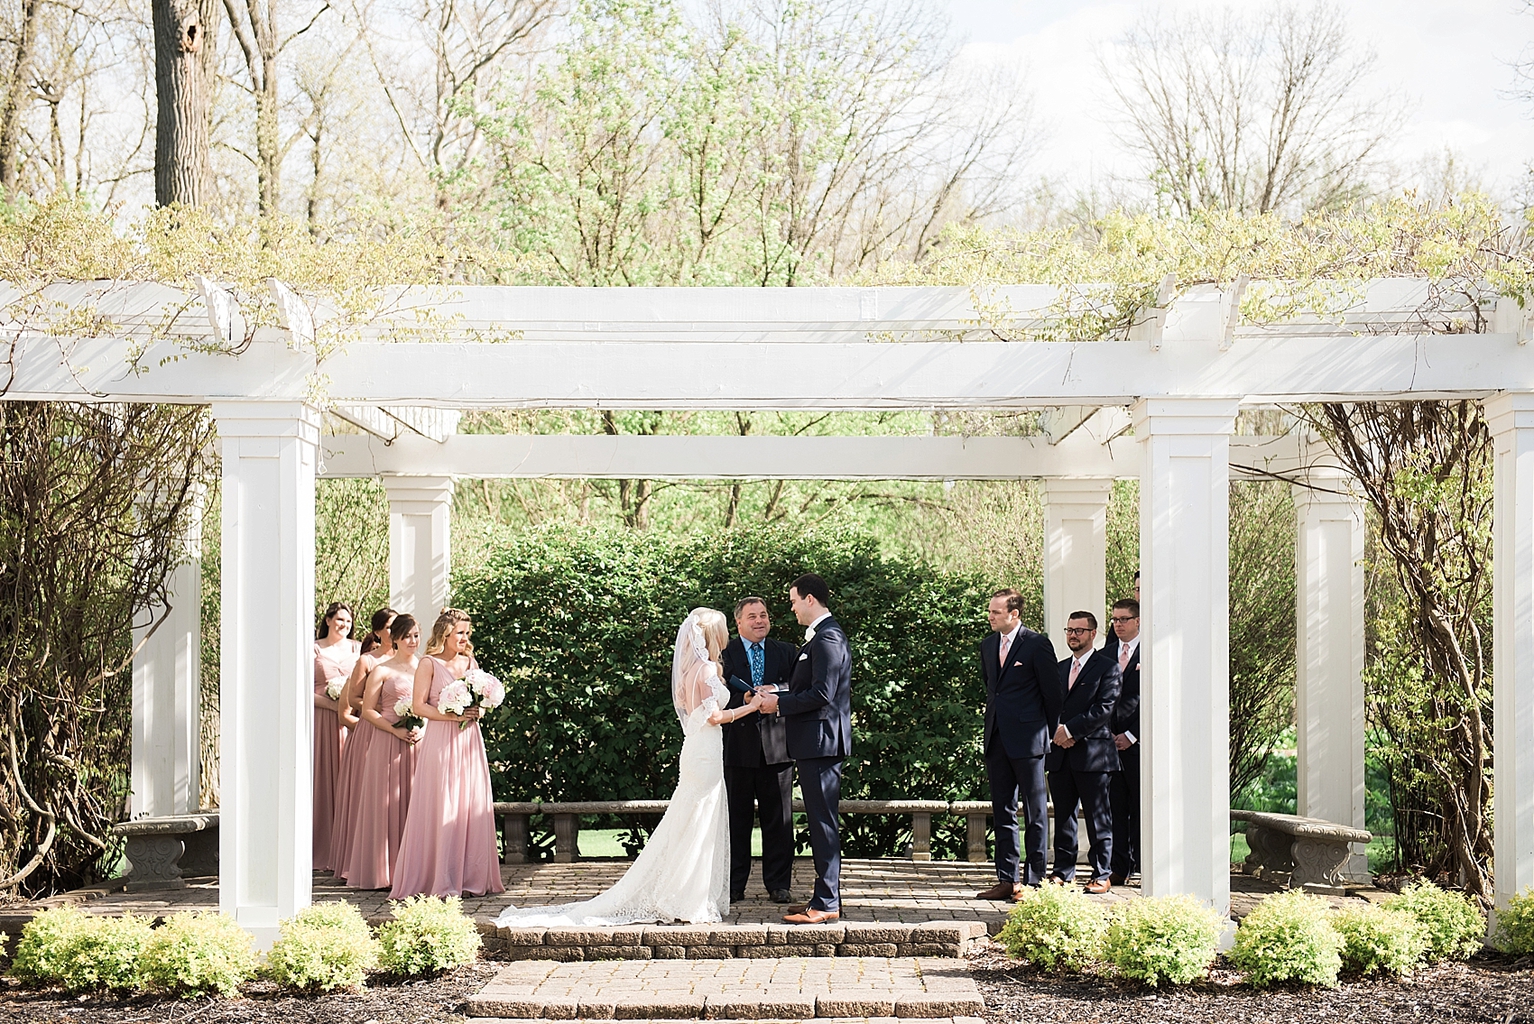 Wellers Carriage House in Saline; ceremony photos